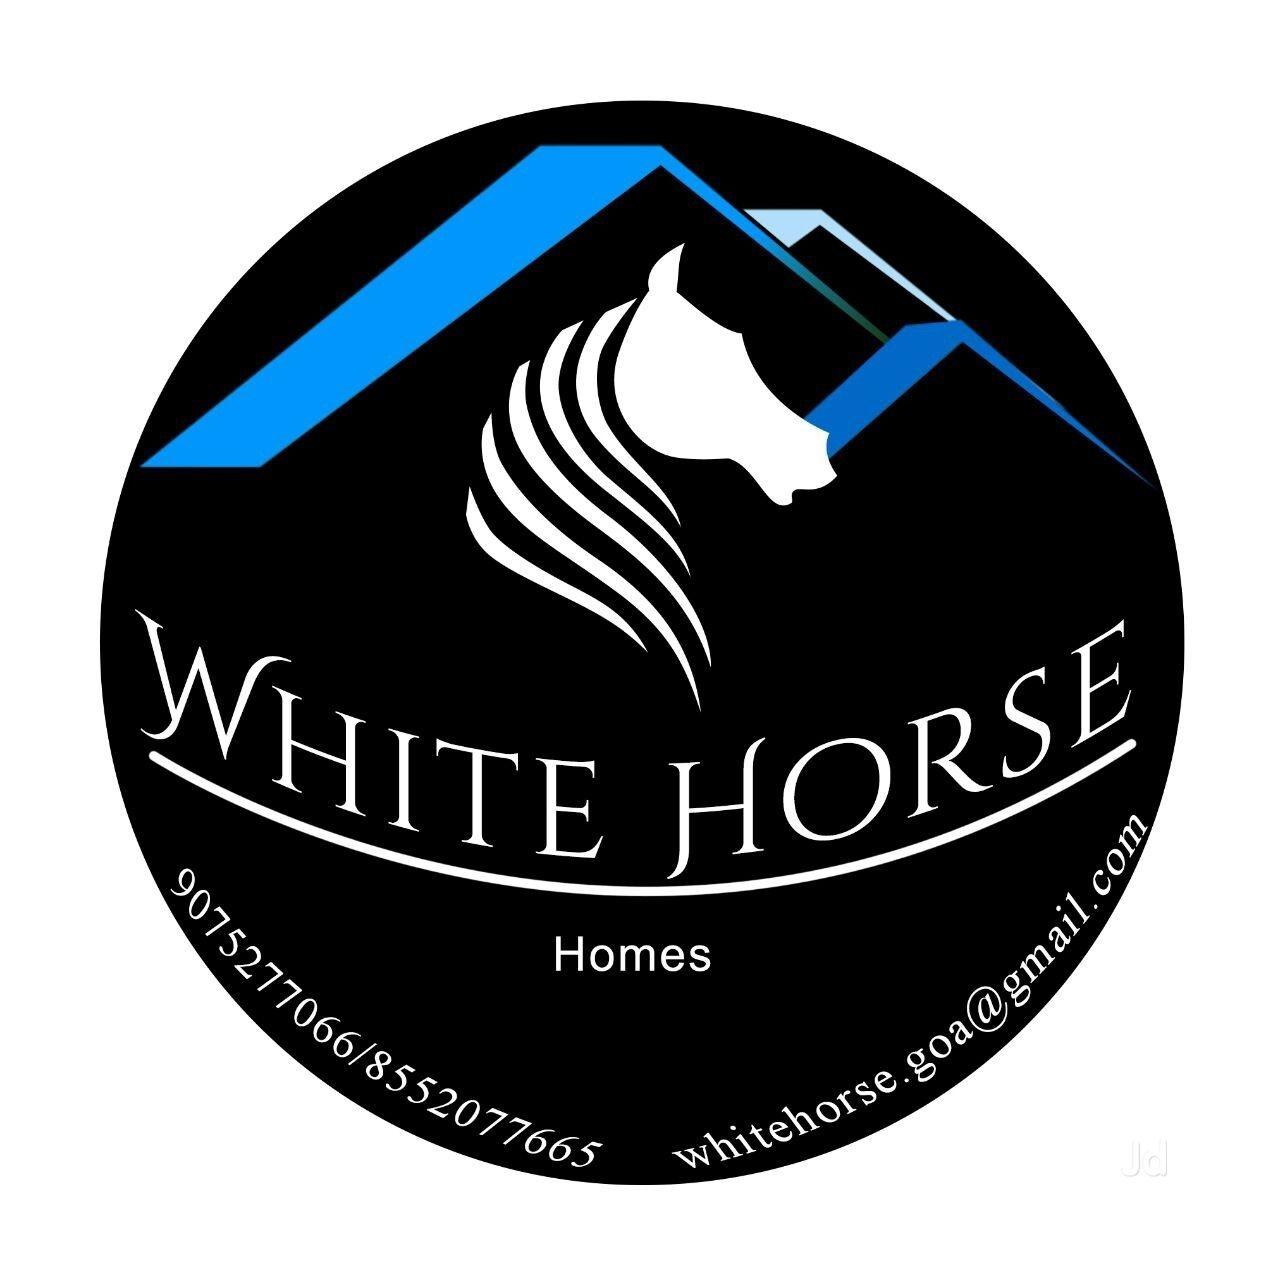 White Horse Circle Logo - White Horse Holiday Homes Photos, Siolim, Goa- Pictures & Images ...